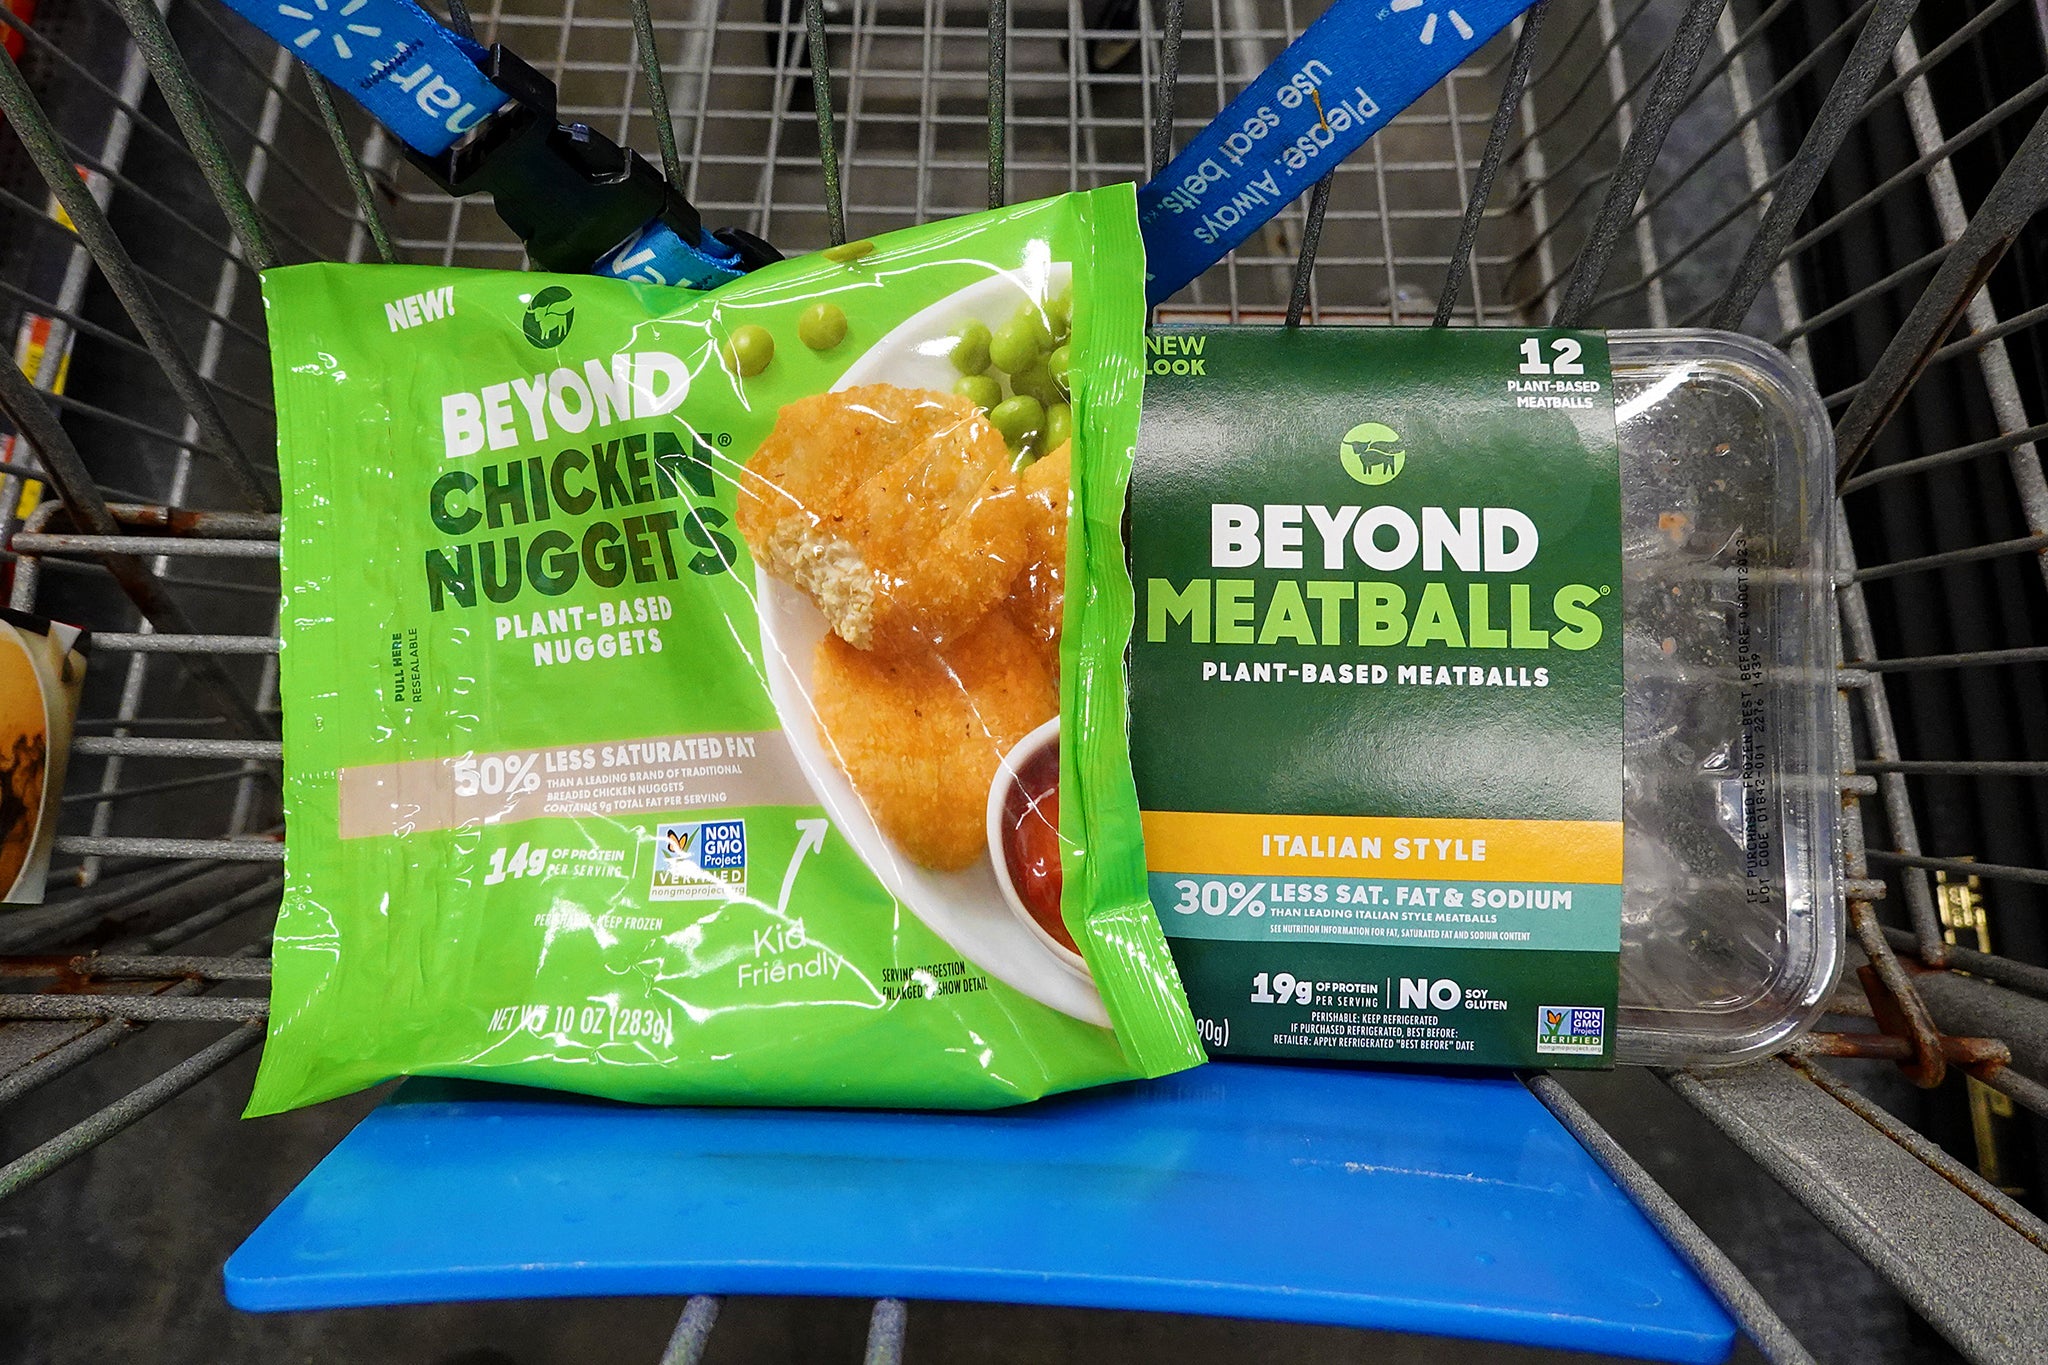 The vegan food manufacturer Beyond Meat has reported declining sales alongside numerous other brands